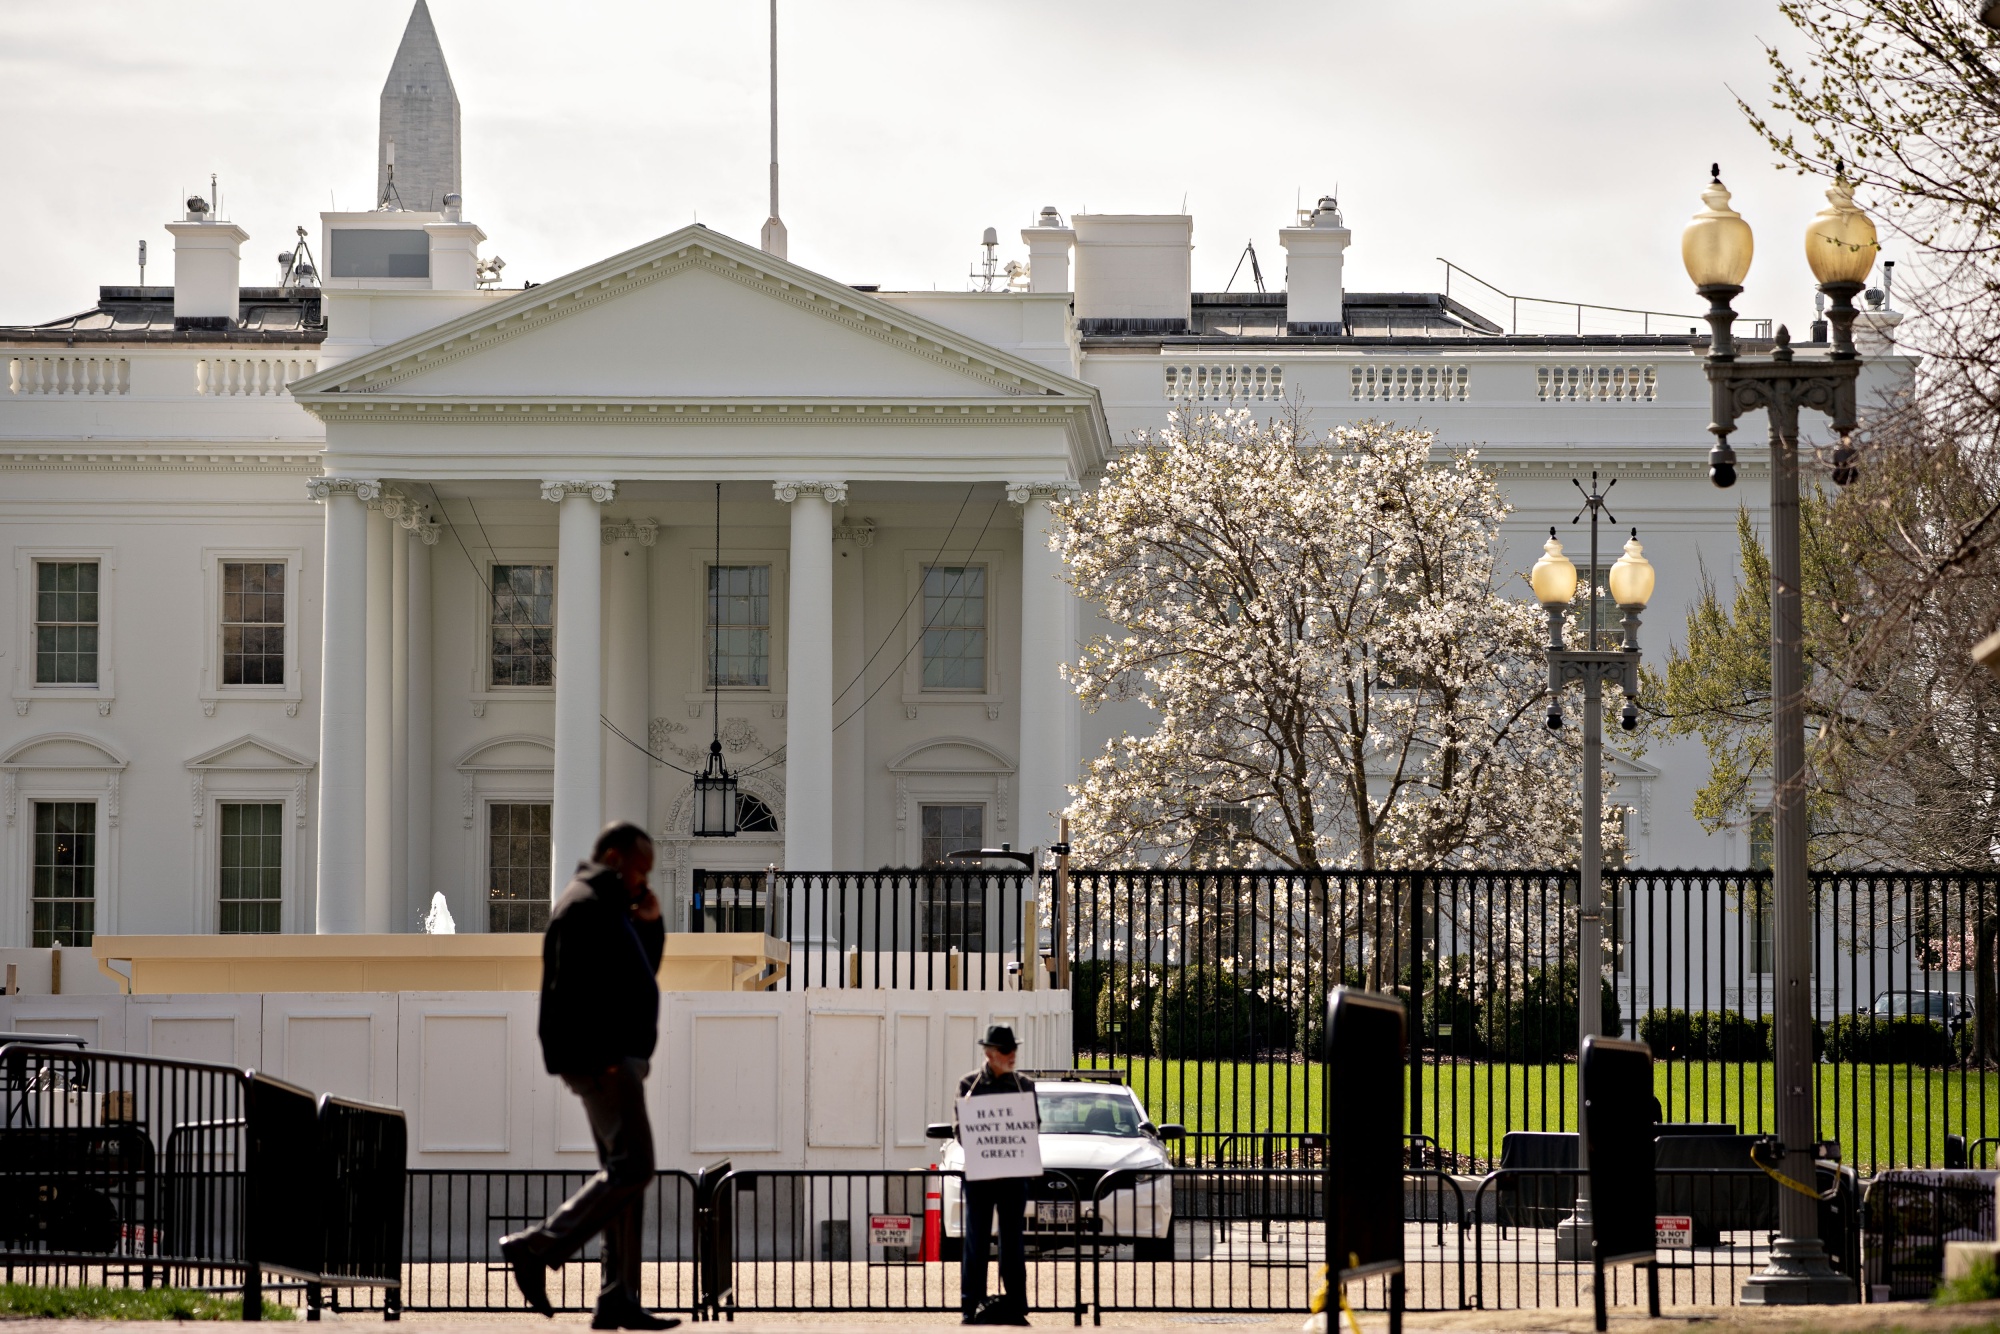 The White House stands in Washington, D.C. on&nbsp;March 17.&nbsp;